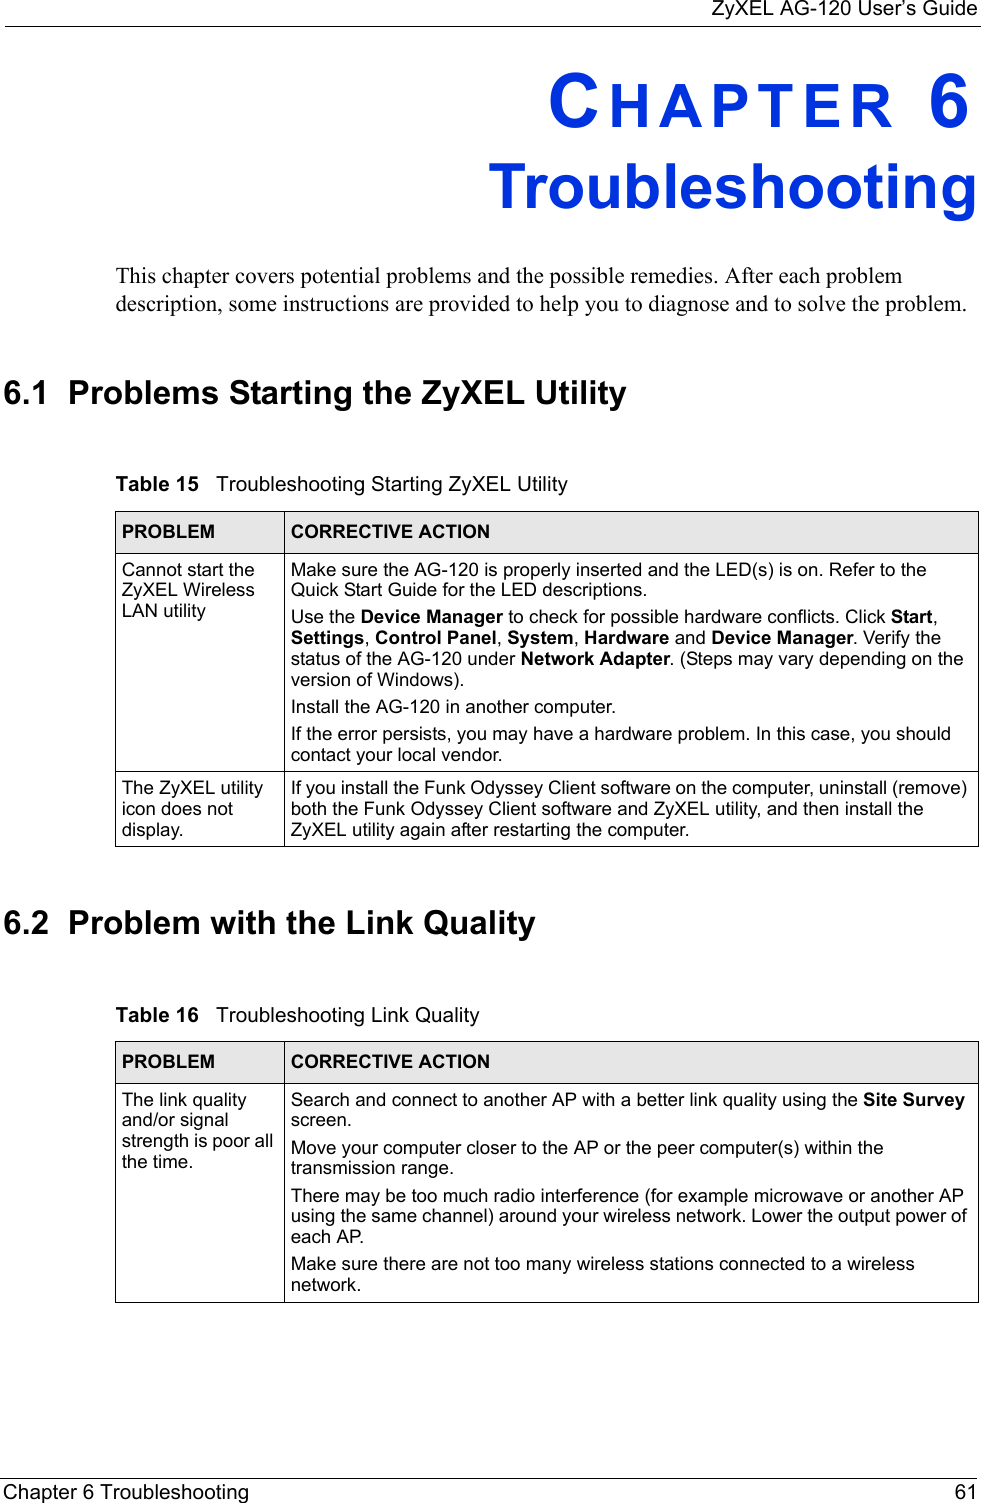 ZyXEL AG-120 User’s GuideChapter 6 Troubleshooting 61CHAPTER 6   TroubleshootingThis chapter covers potential problems and the possible remedies. After each problem description, some instructions are provided to help you to diagnose and to solve the problem.6.1  Problems Starting the ZyXEL Utility 6.2  Problem with the Link QualityTable 15   Troubleshooting Starting ZyXEL Utility  PROBLEM CORRECTIVE ACTIONCannot start the ZyXEL Wireless LAN utilityMake sure the AG-120 is properly inserted and the LED(s) is on. Refer to the Quick Start Guide for the LED descriptions.Use the Device Manager to check for possible hardware conflicts. Click Start, Settings, Control Panel, System, Hardware and Device Manager. Verify the status of the AG-120 under Network Adapter. (Steps may vary depending on the version of Windows). Install the AG-120 in another computer.If the error persists, you may have a hardware problem. In this case, you should contact your local vendor.The ZyXEL utility icon does not display.If you install the Funk Odyssey Client software on the computer, uninstall (remove) both the Funk Odyssey Client software and ZyXEL utility, and then install the ZyXEL utility again after restarting the computer.Table 16   Troubleshooting Link Quality PROBLEM CORRECTIVE ACTIONThe link quality and/or signal strength is poor all the time.Search and connect to another AP with a better link quality using the Site Survey screen.Move your computer closer to the AP or the peer computer(s) within the transmission range.There may be too much radio interference (for example microwave or another AP using the same channel) around your wireless network. Lower the output power of each AP.Make sure there are not too many wireless stations connected to a wireless network.